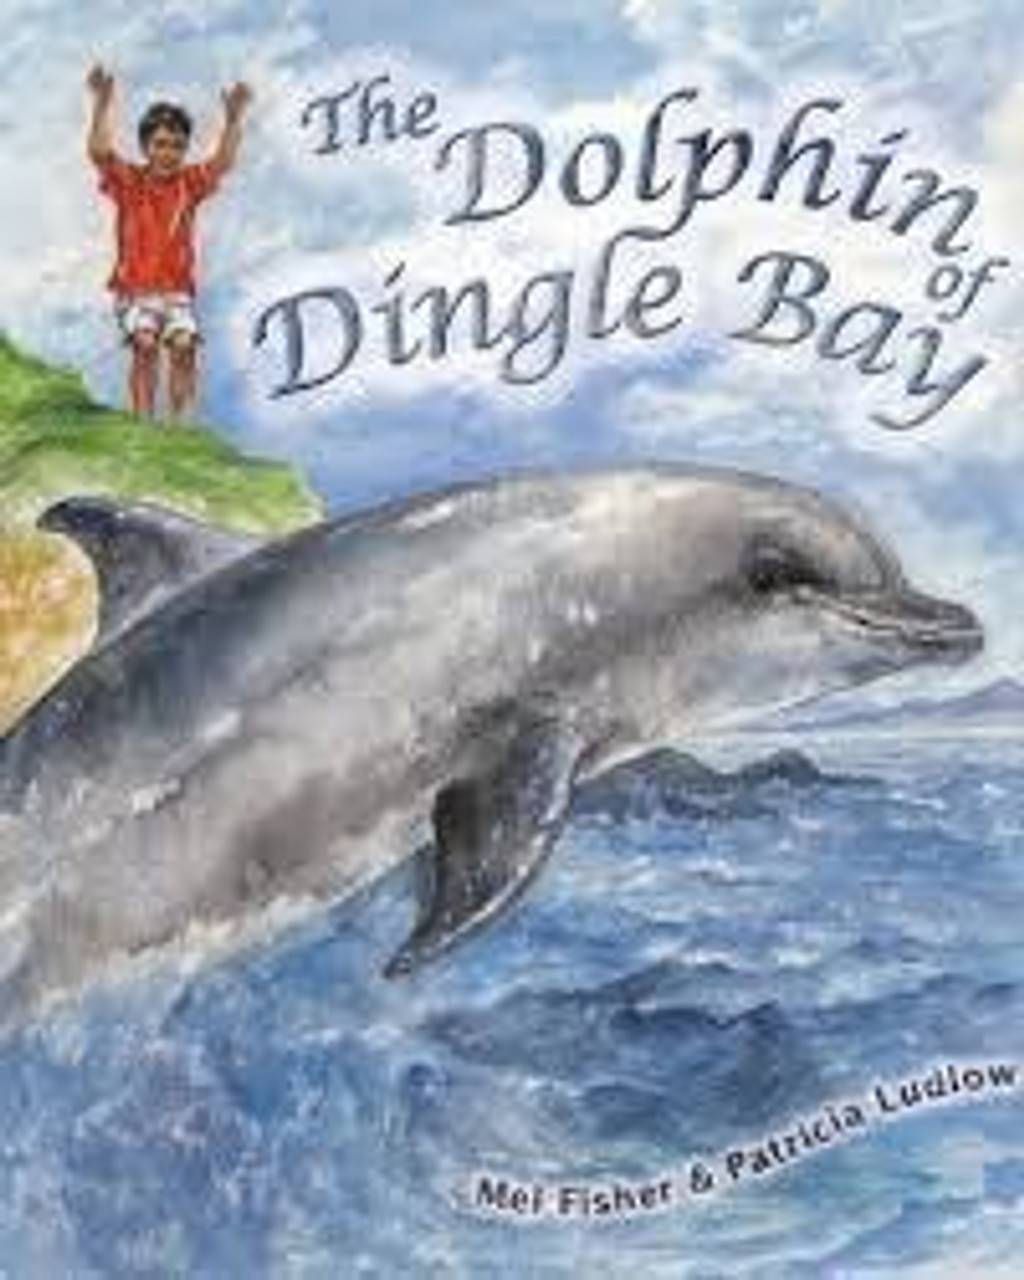 IMG : The Dolphin of Dingle Bay